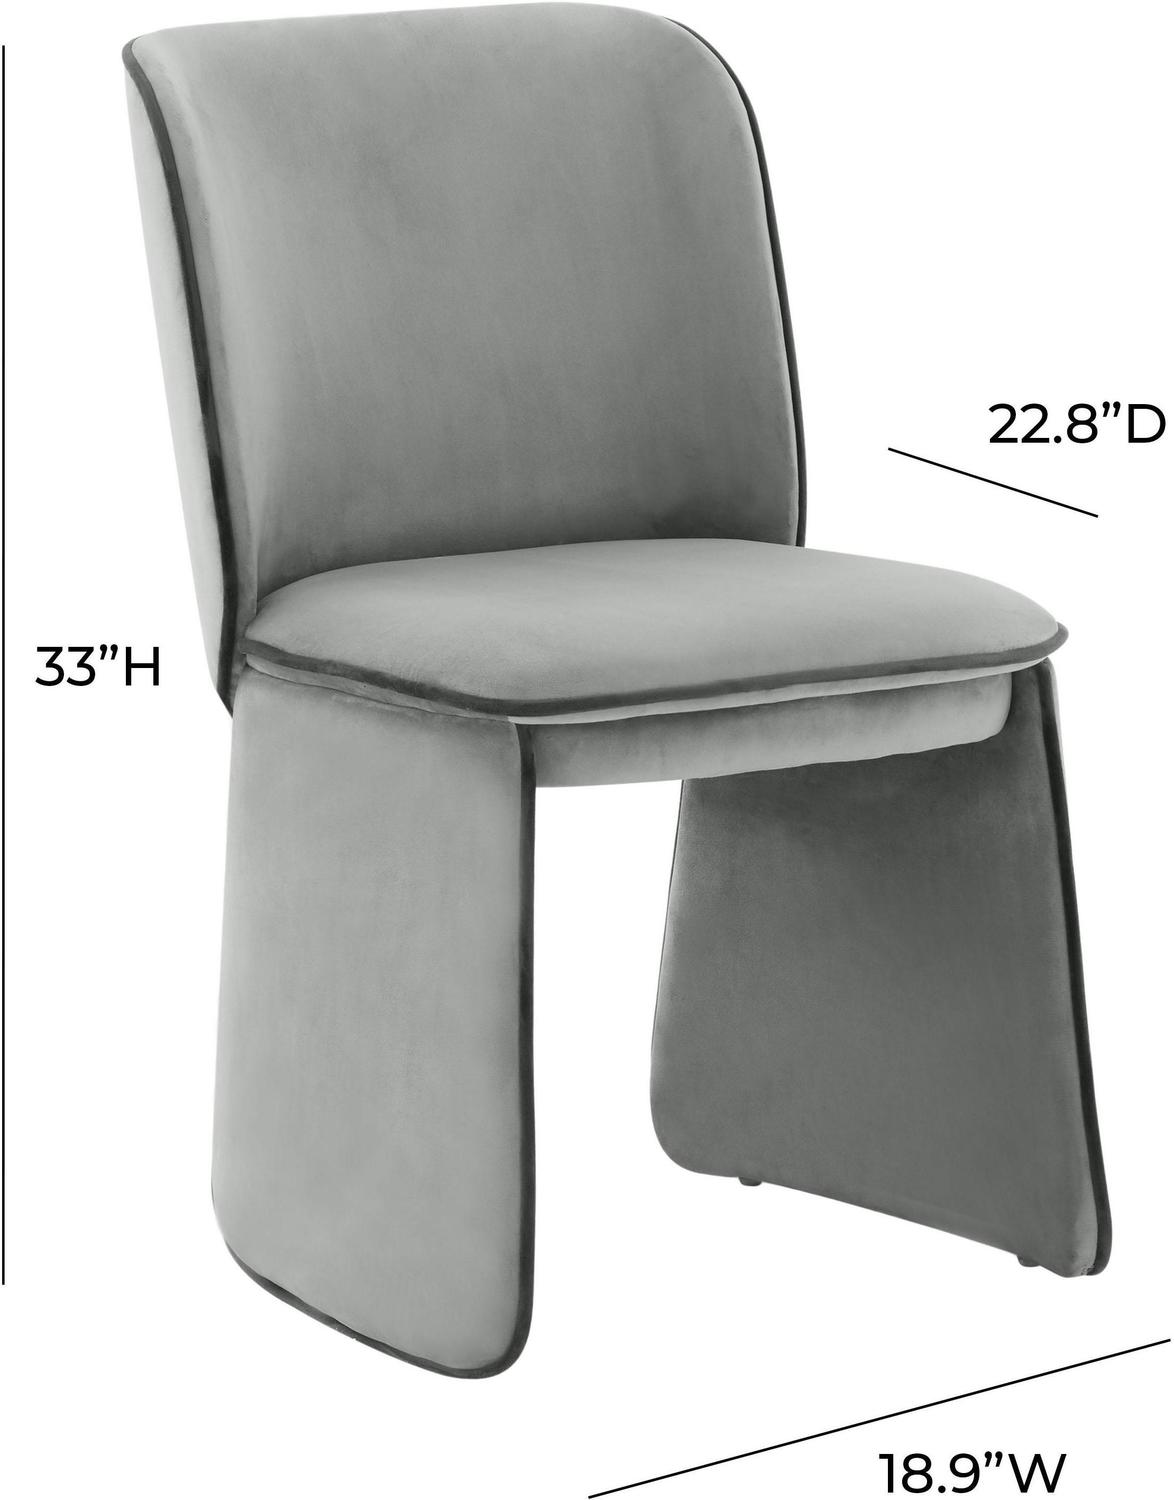 emerald green chairs Contemporary Design Furniture Dining Chairs Dining Room Chairs Grey